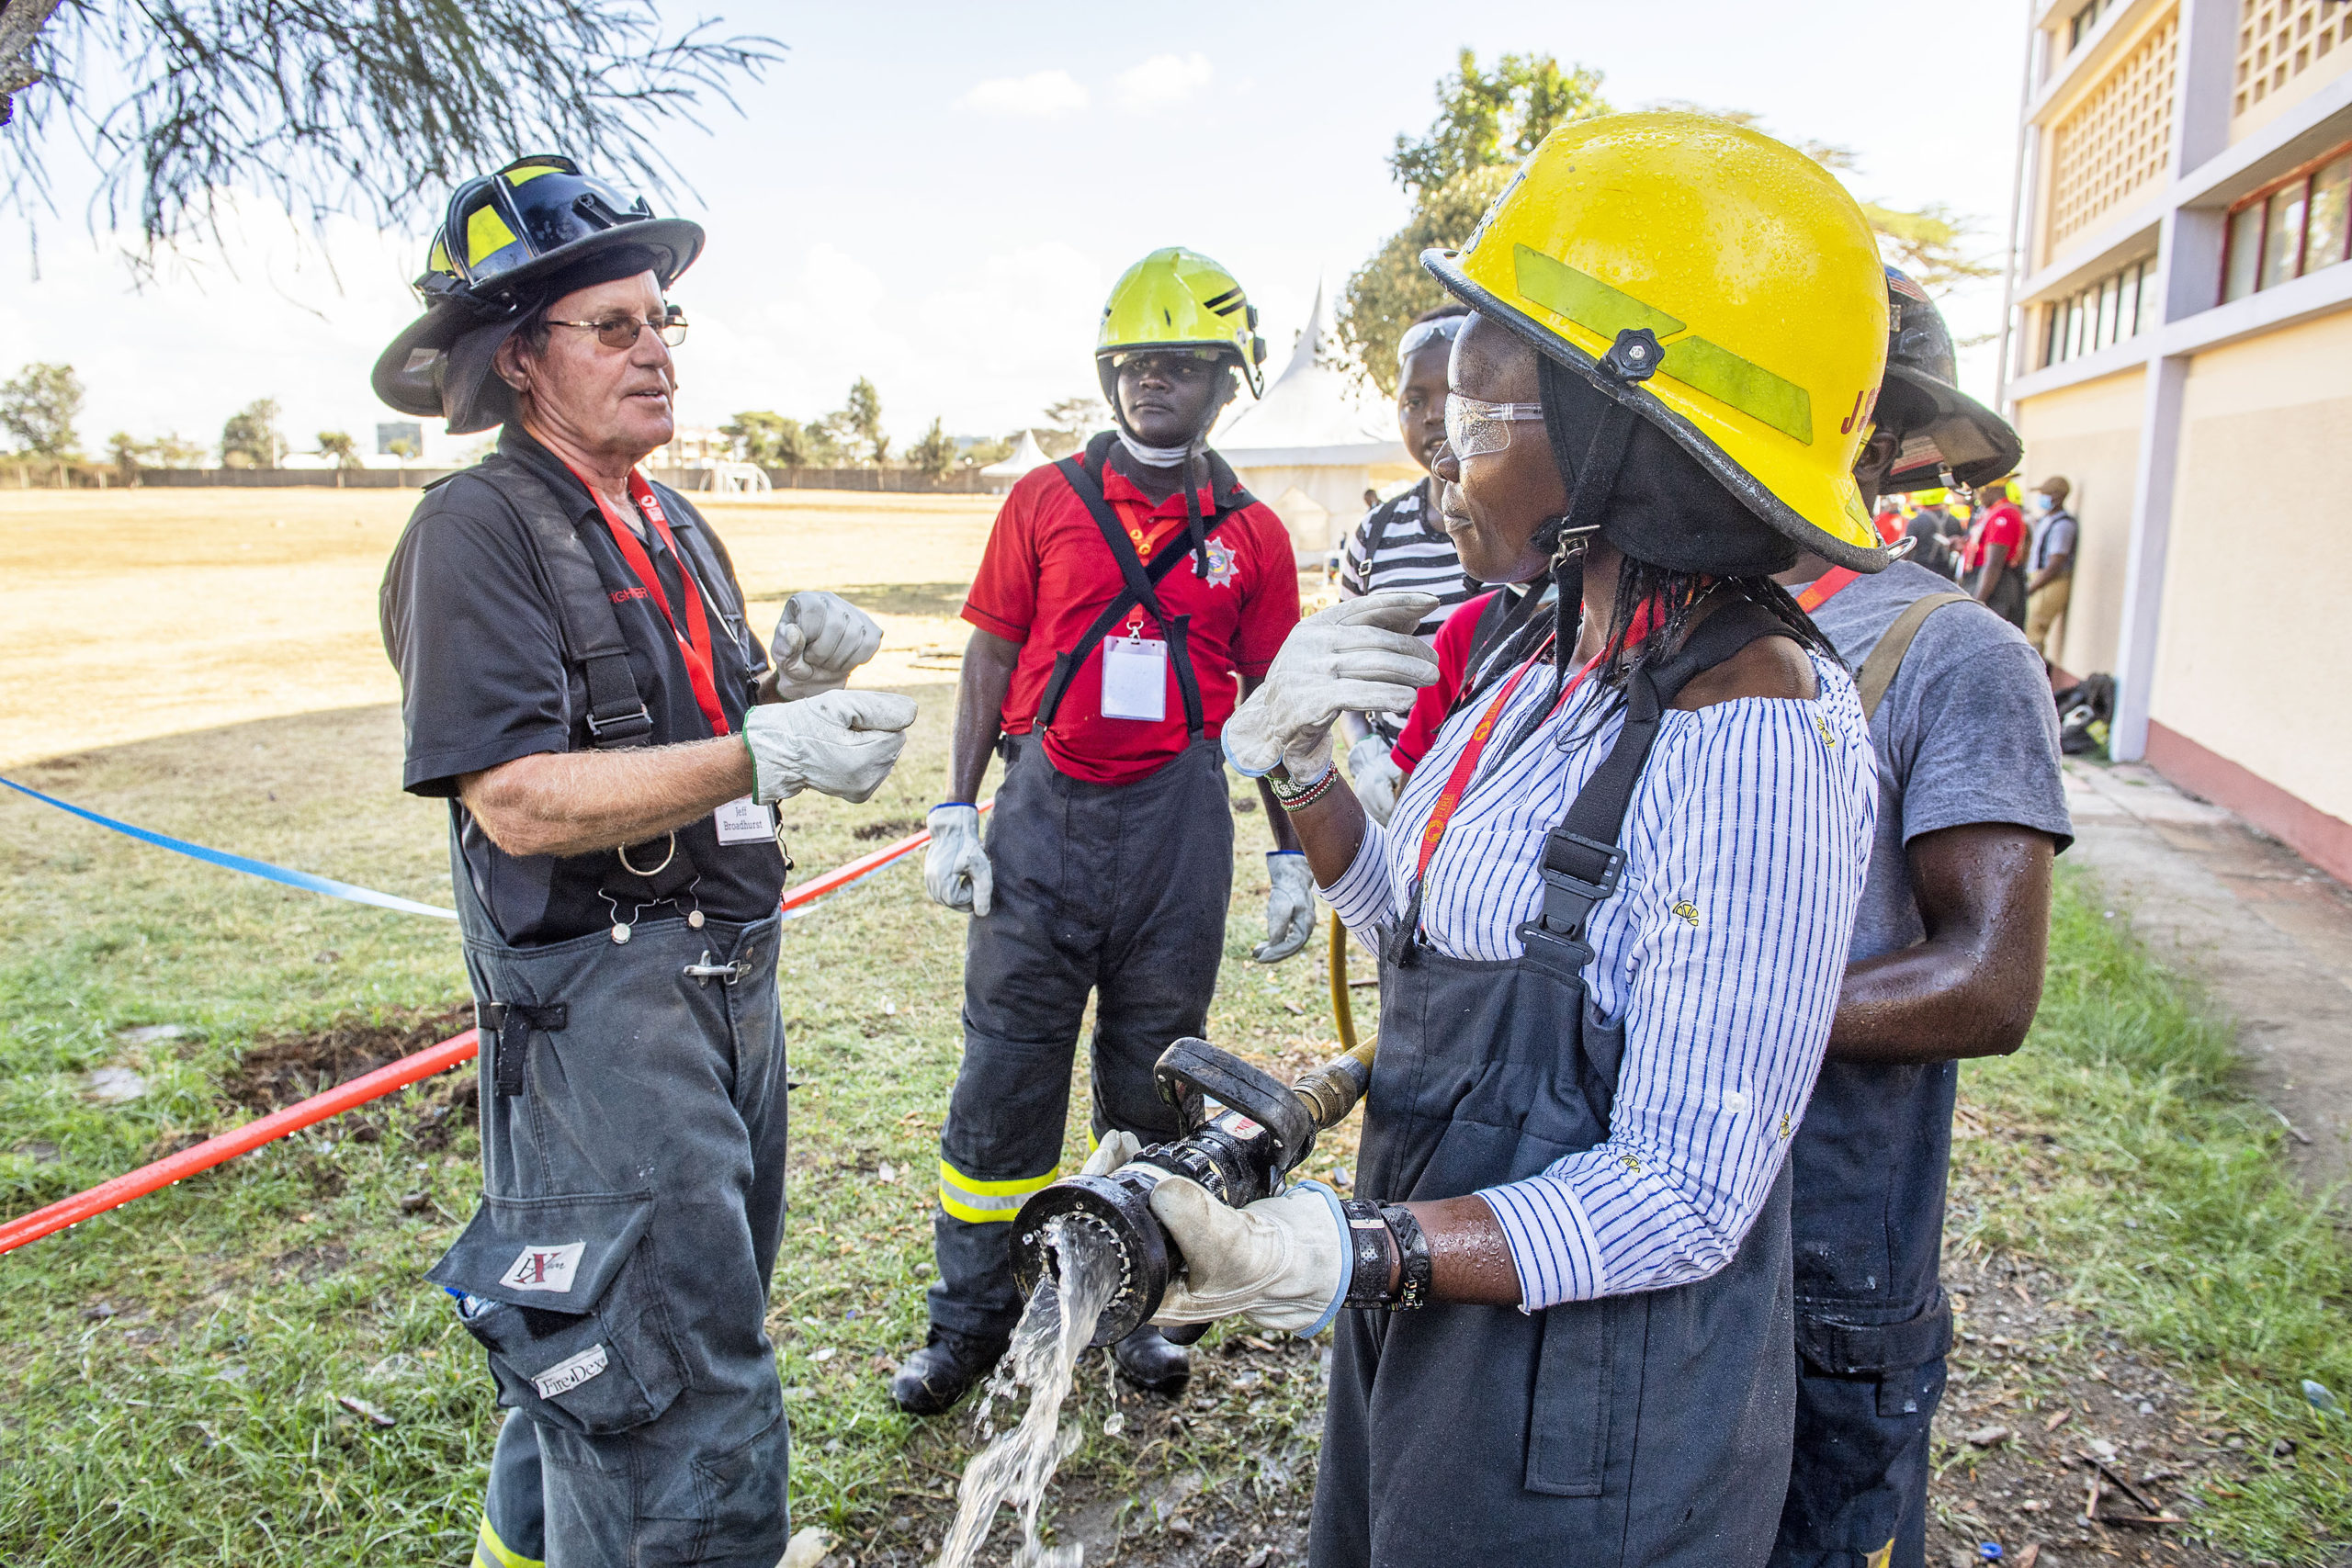 Firefighter Jeff Broadhurst offers advice on hose-handling techniques to Kenyan firefighters during the Africa Fire Mission trip to Nairobi, Kenya in November.